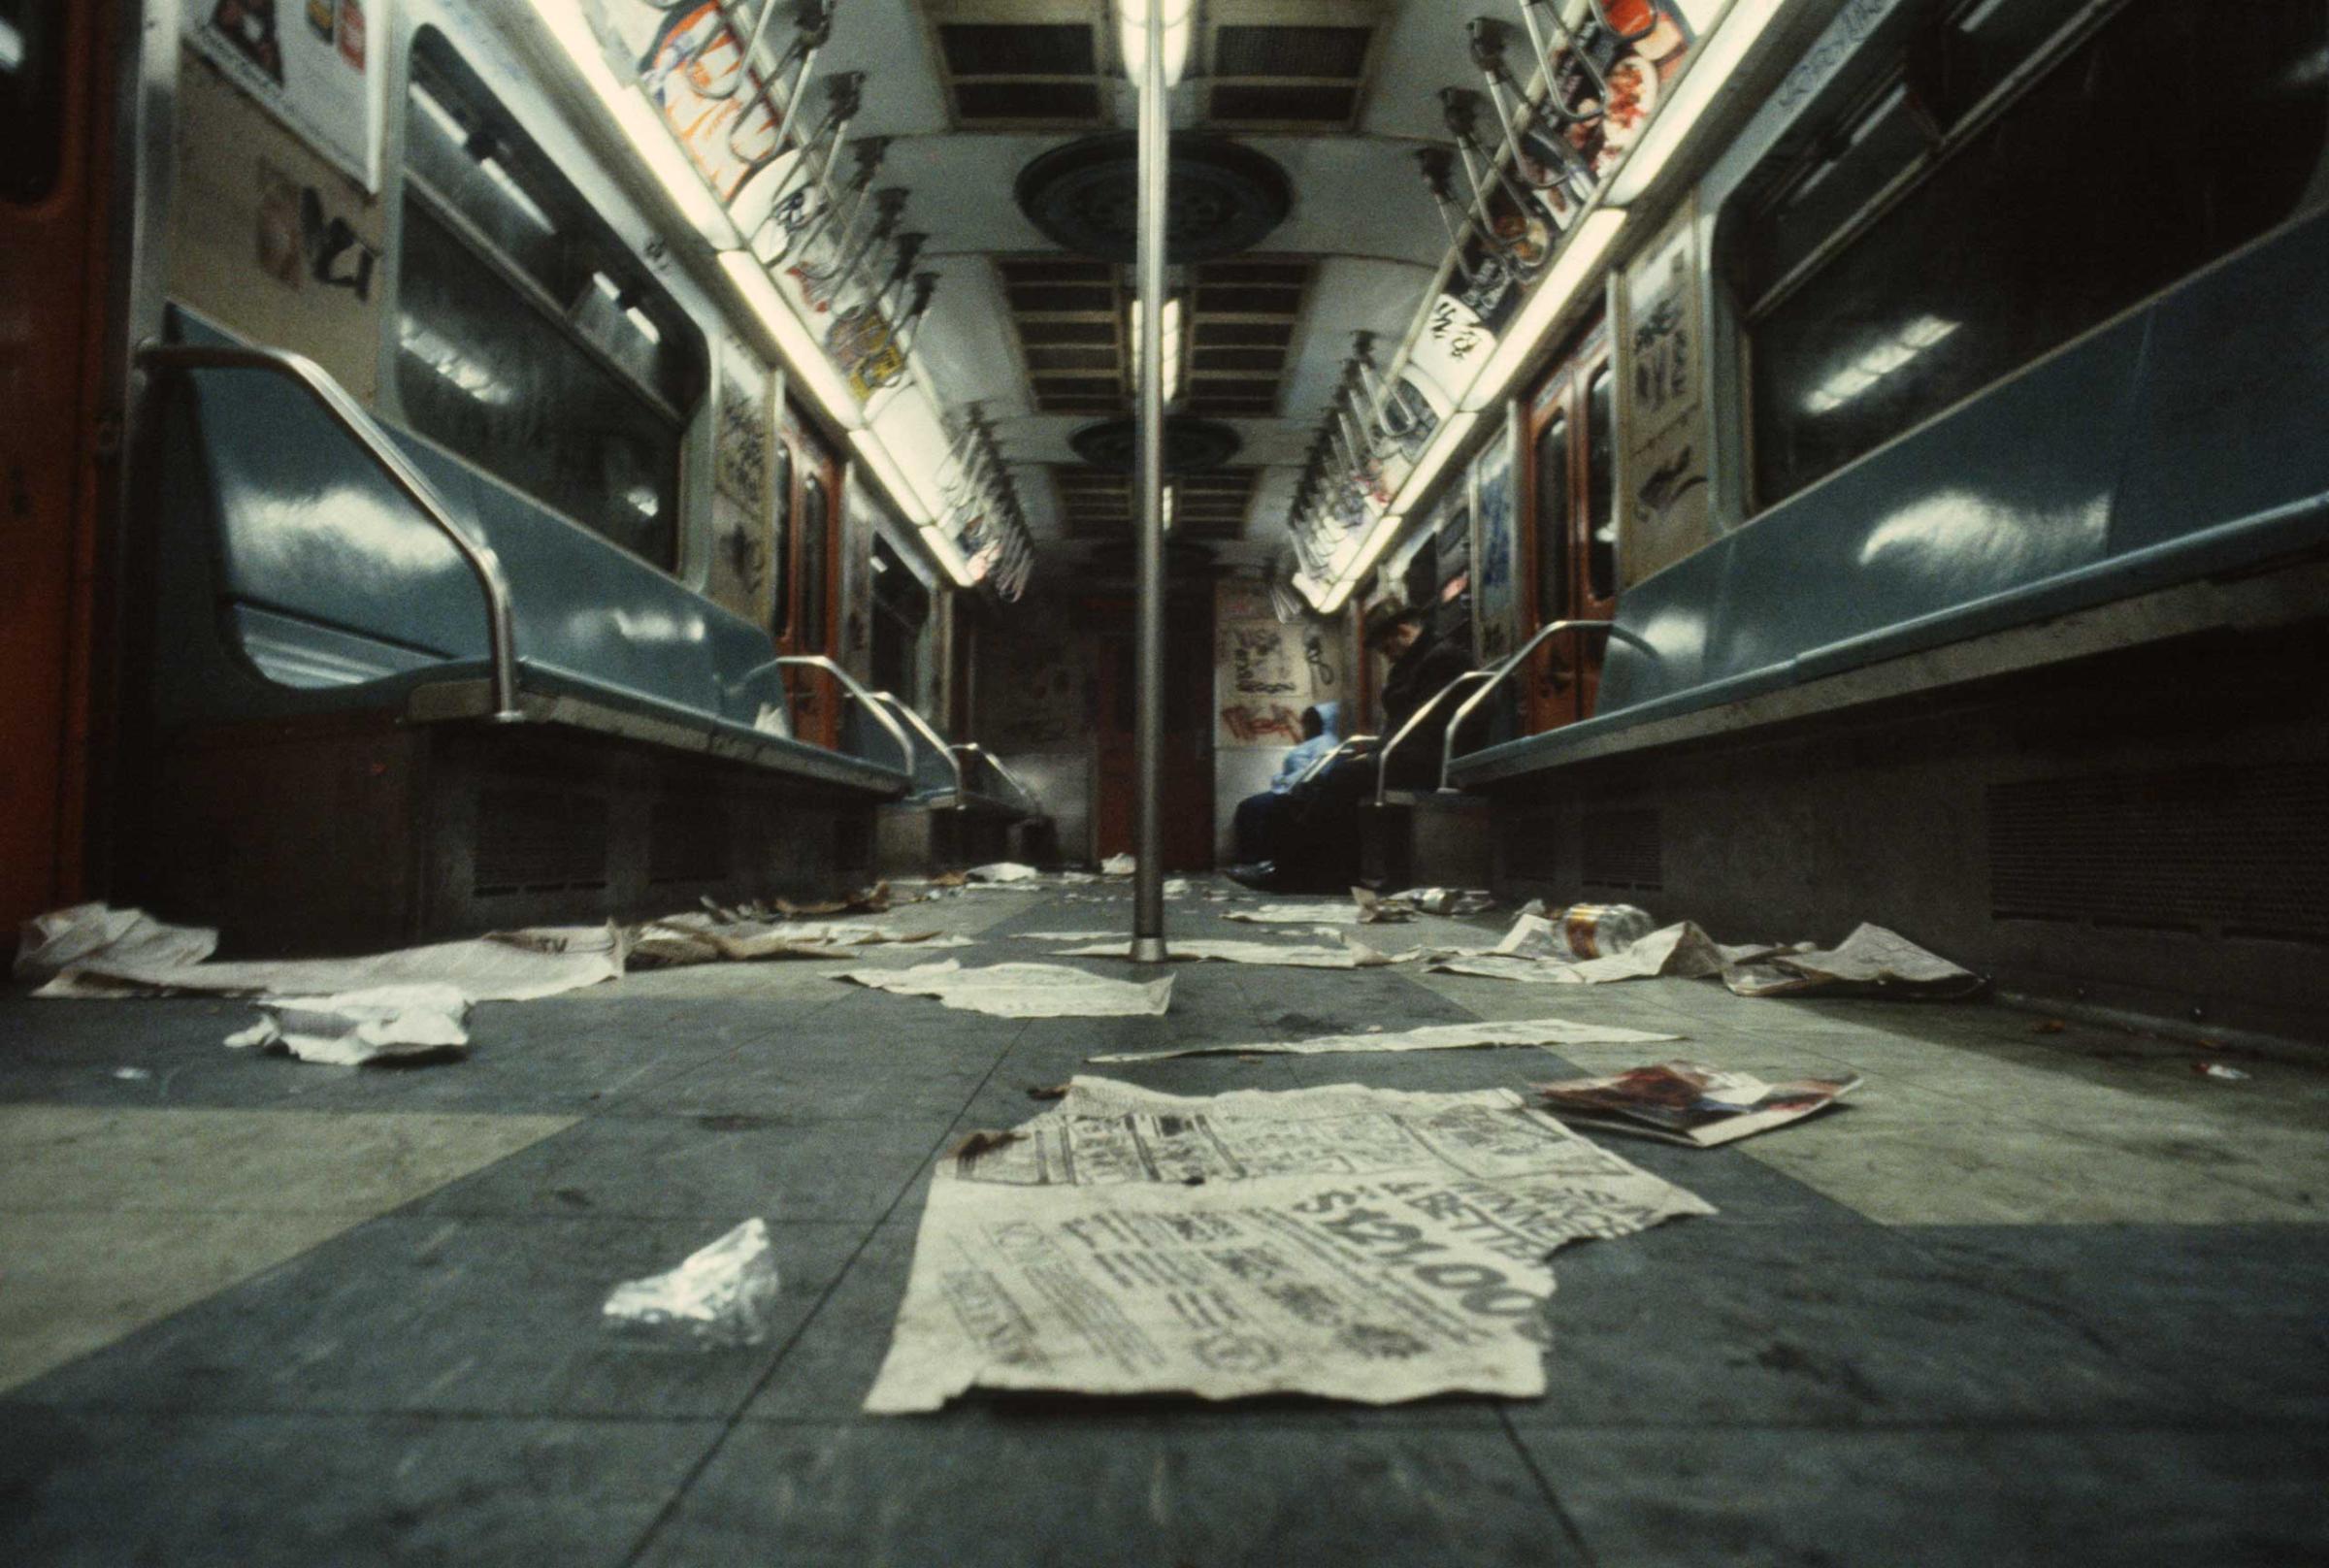 Discarded newspapers and trash on the floor of a subway car, 1981.